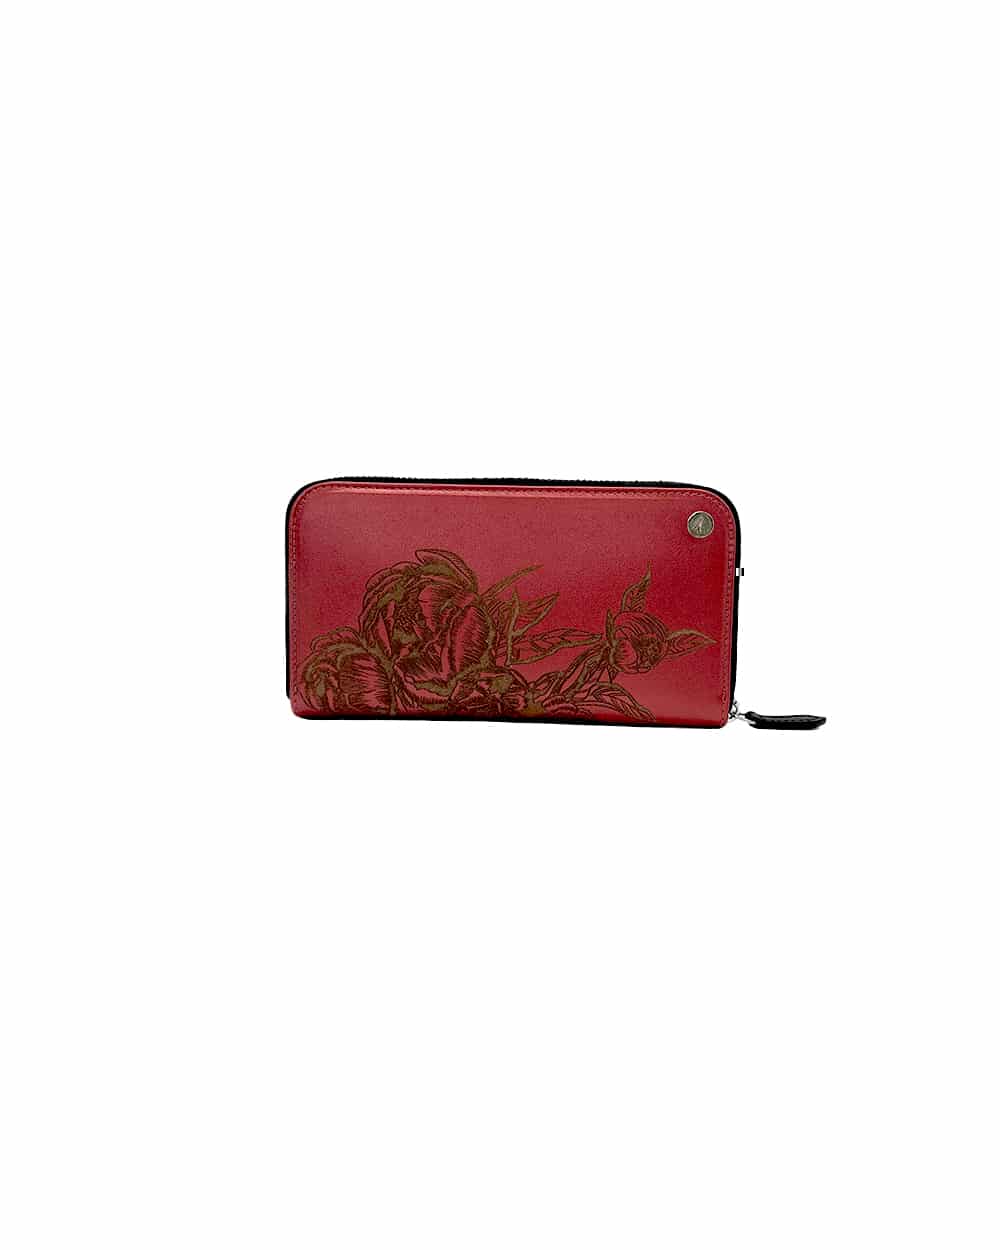 Companion wallet BOMBYX red